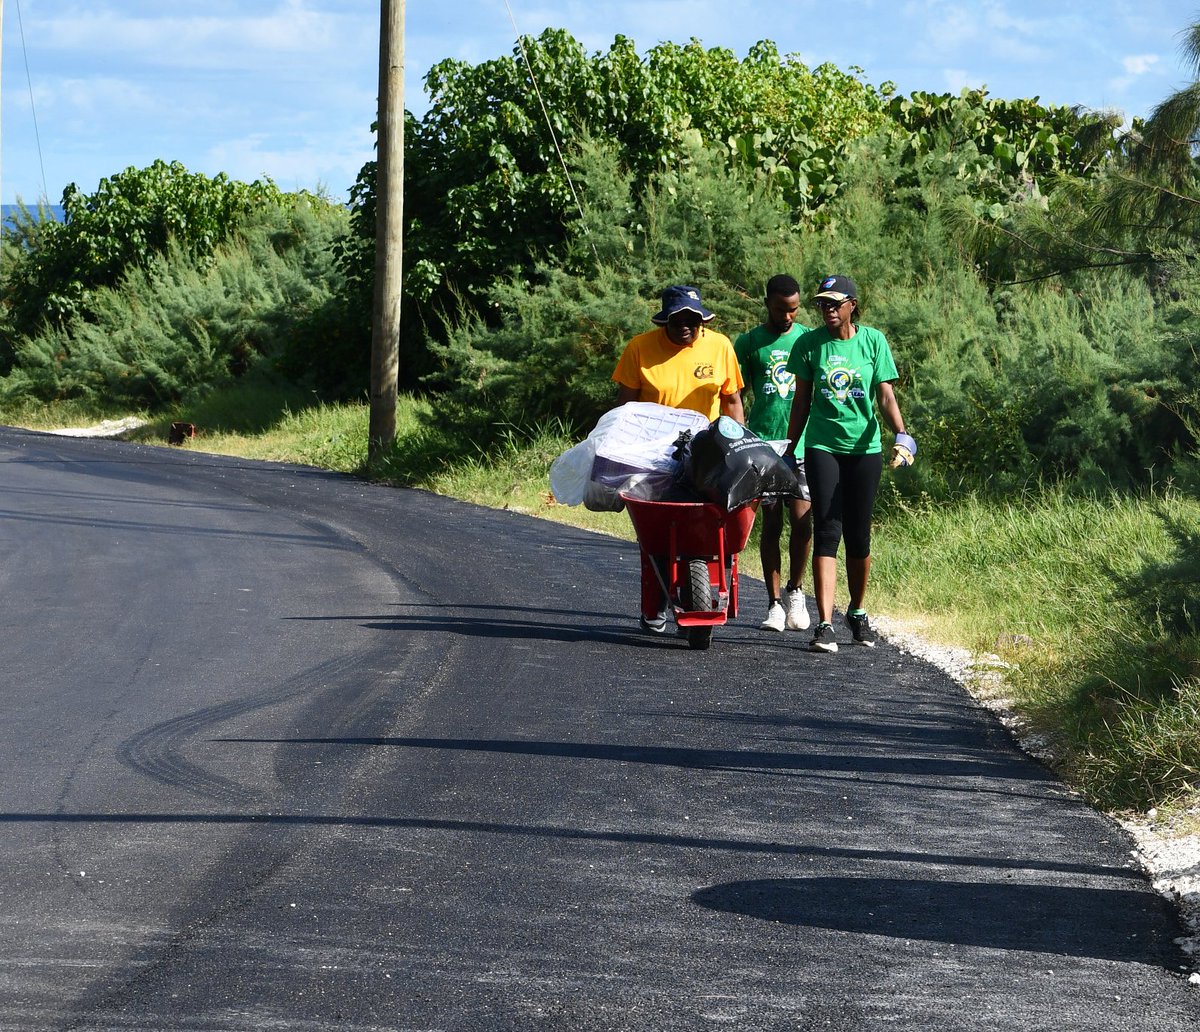 The University of the West Indies, Cave Hill Campus joined an island-wide clean up led by the Nation Publishing on Saturday, in observance of World Cleanup Day. #WorldCleanUpDay #UWICaveHill #GreenNation